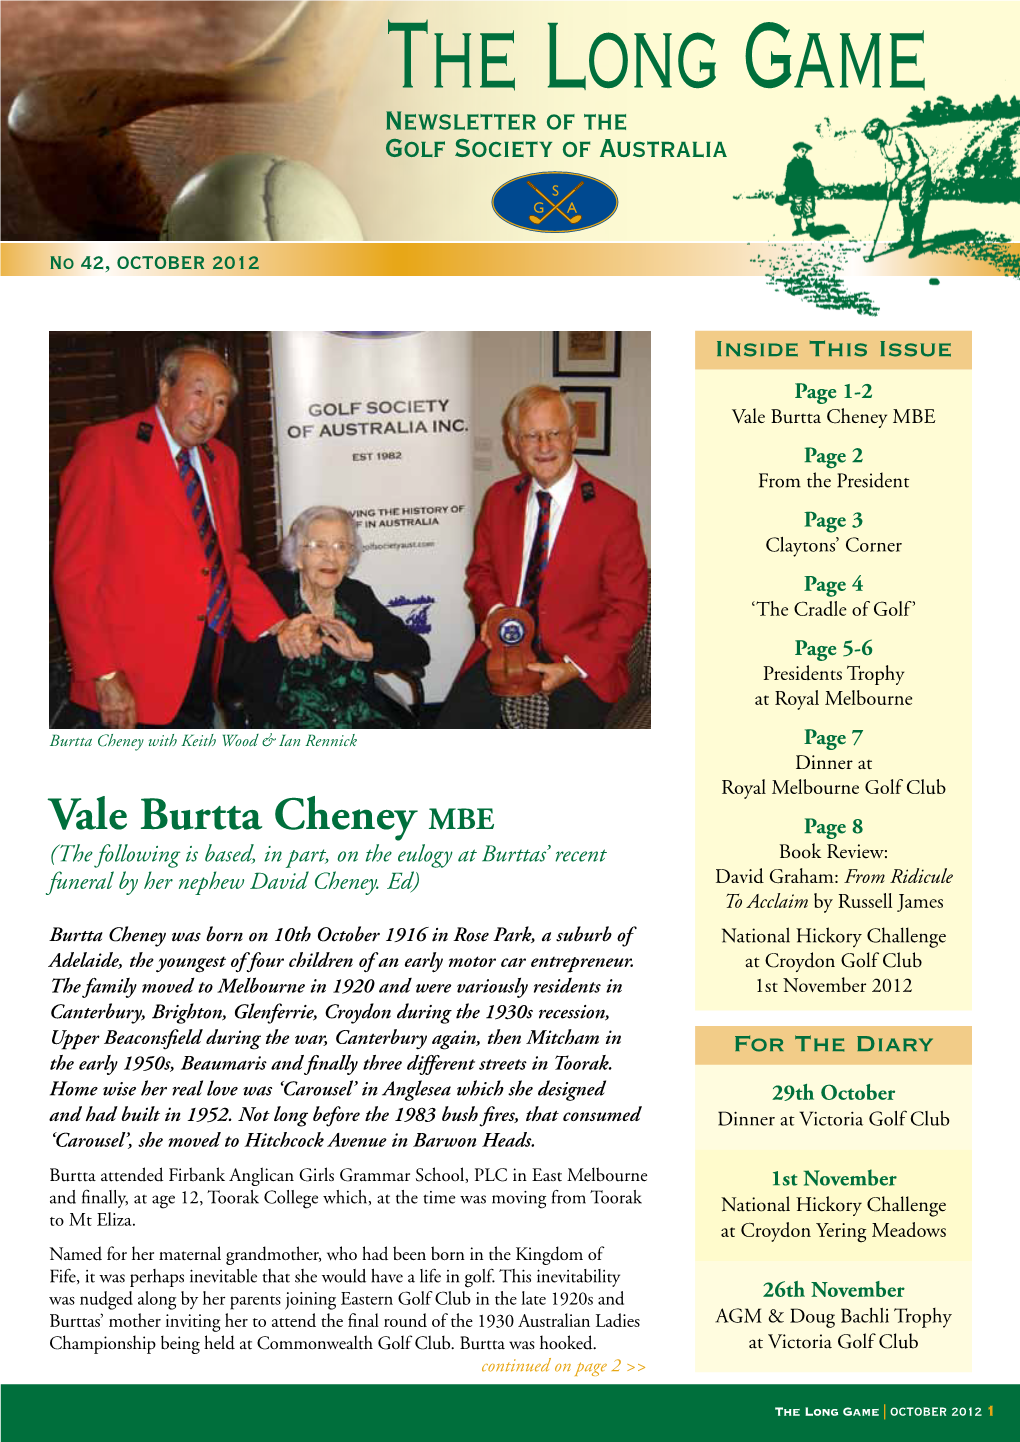 Vale Burtta Cheney MBE Page 2 from the President Page 3 Claytons’ Corner Page 4 ‘The Cradle of Golf’ Page 5-6 Presidents Trophy at Royal Melbourne